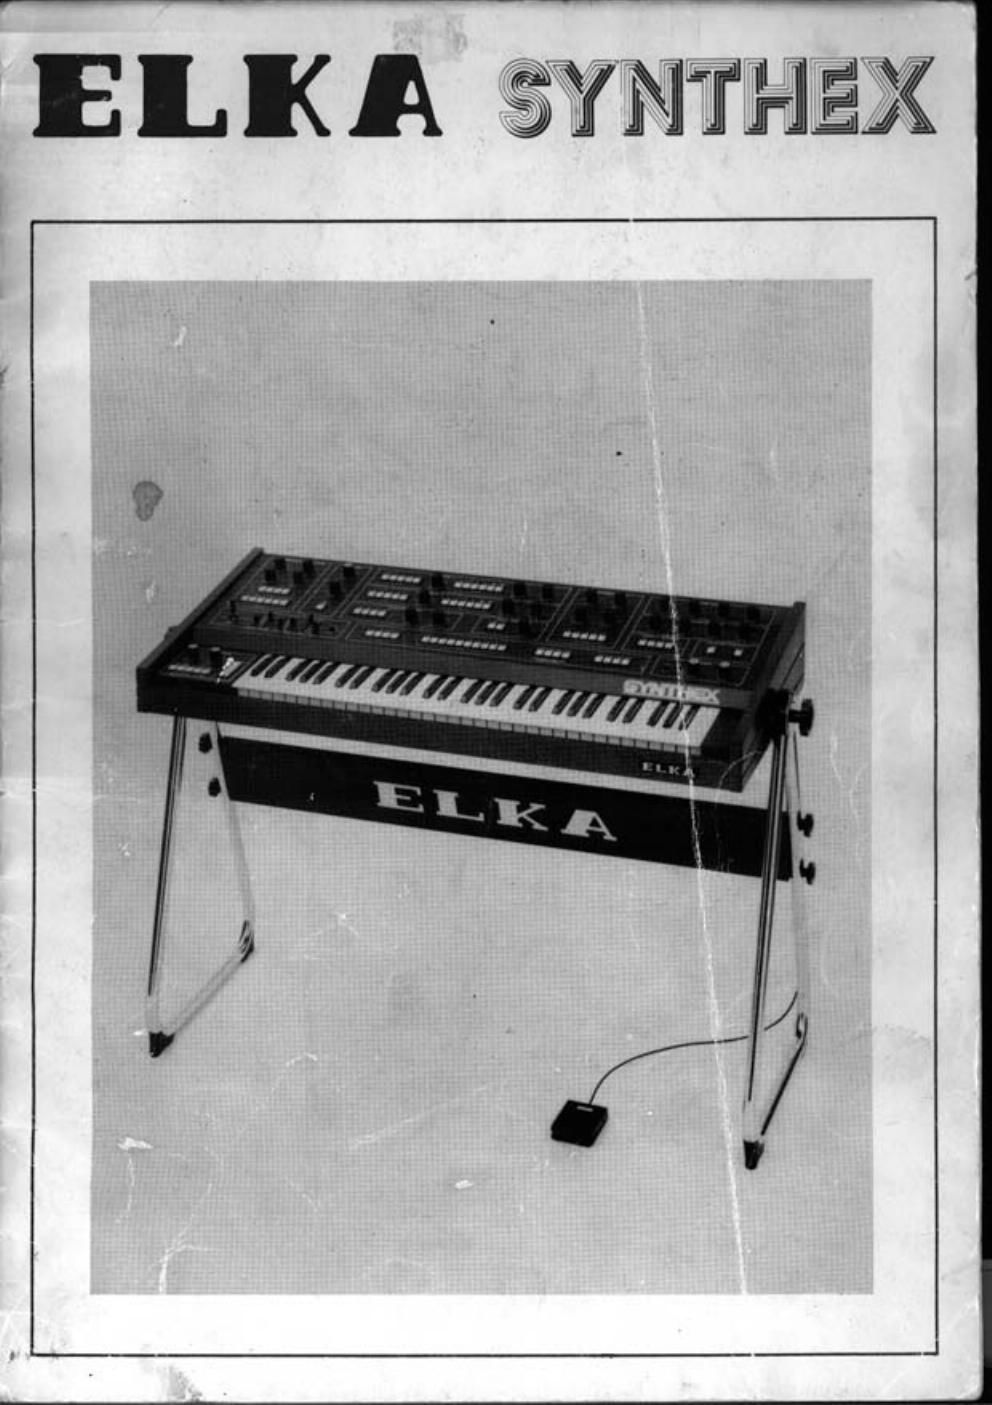 elka synthex owner manual